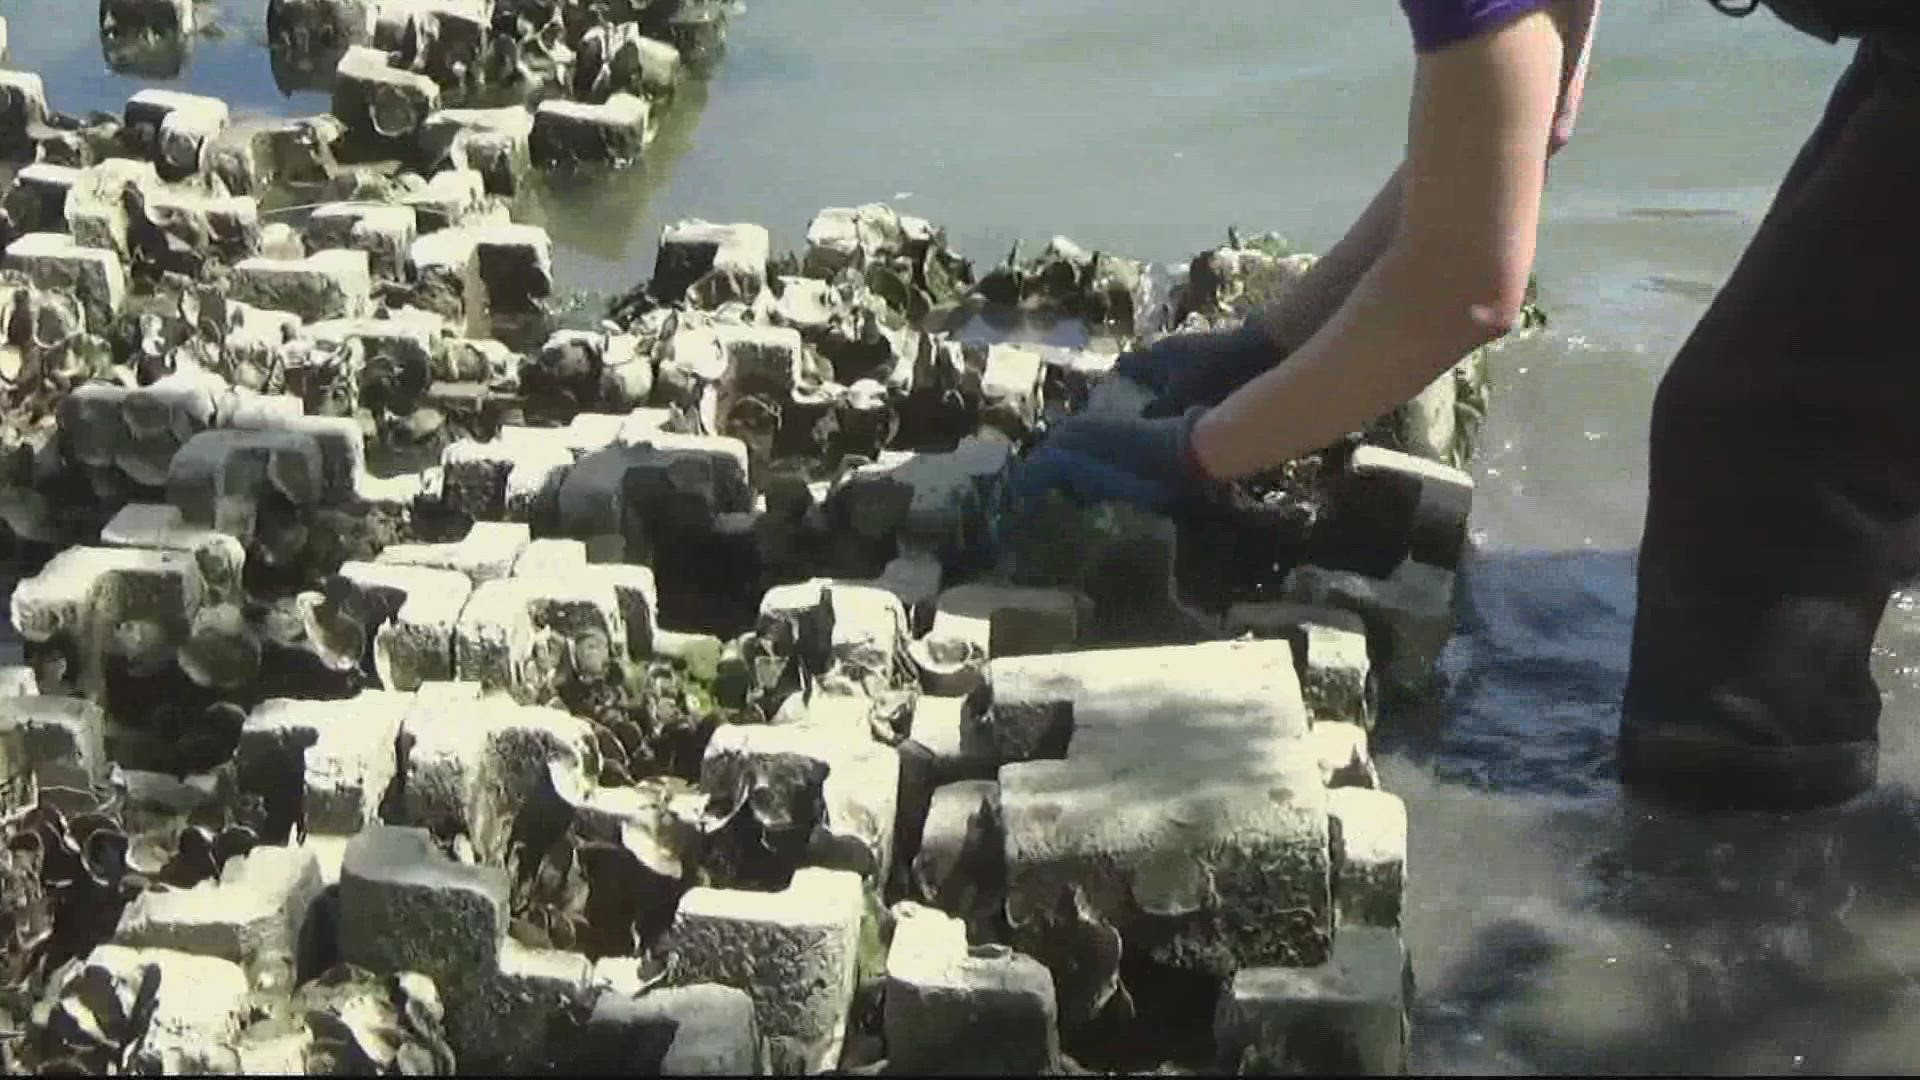 Cinder block stacks become a thriving habitat that shields the shoreline and keeps the bay clean.